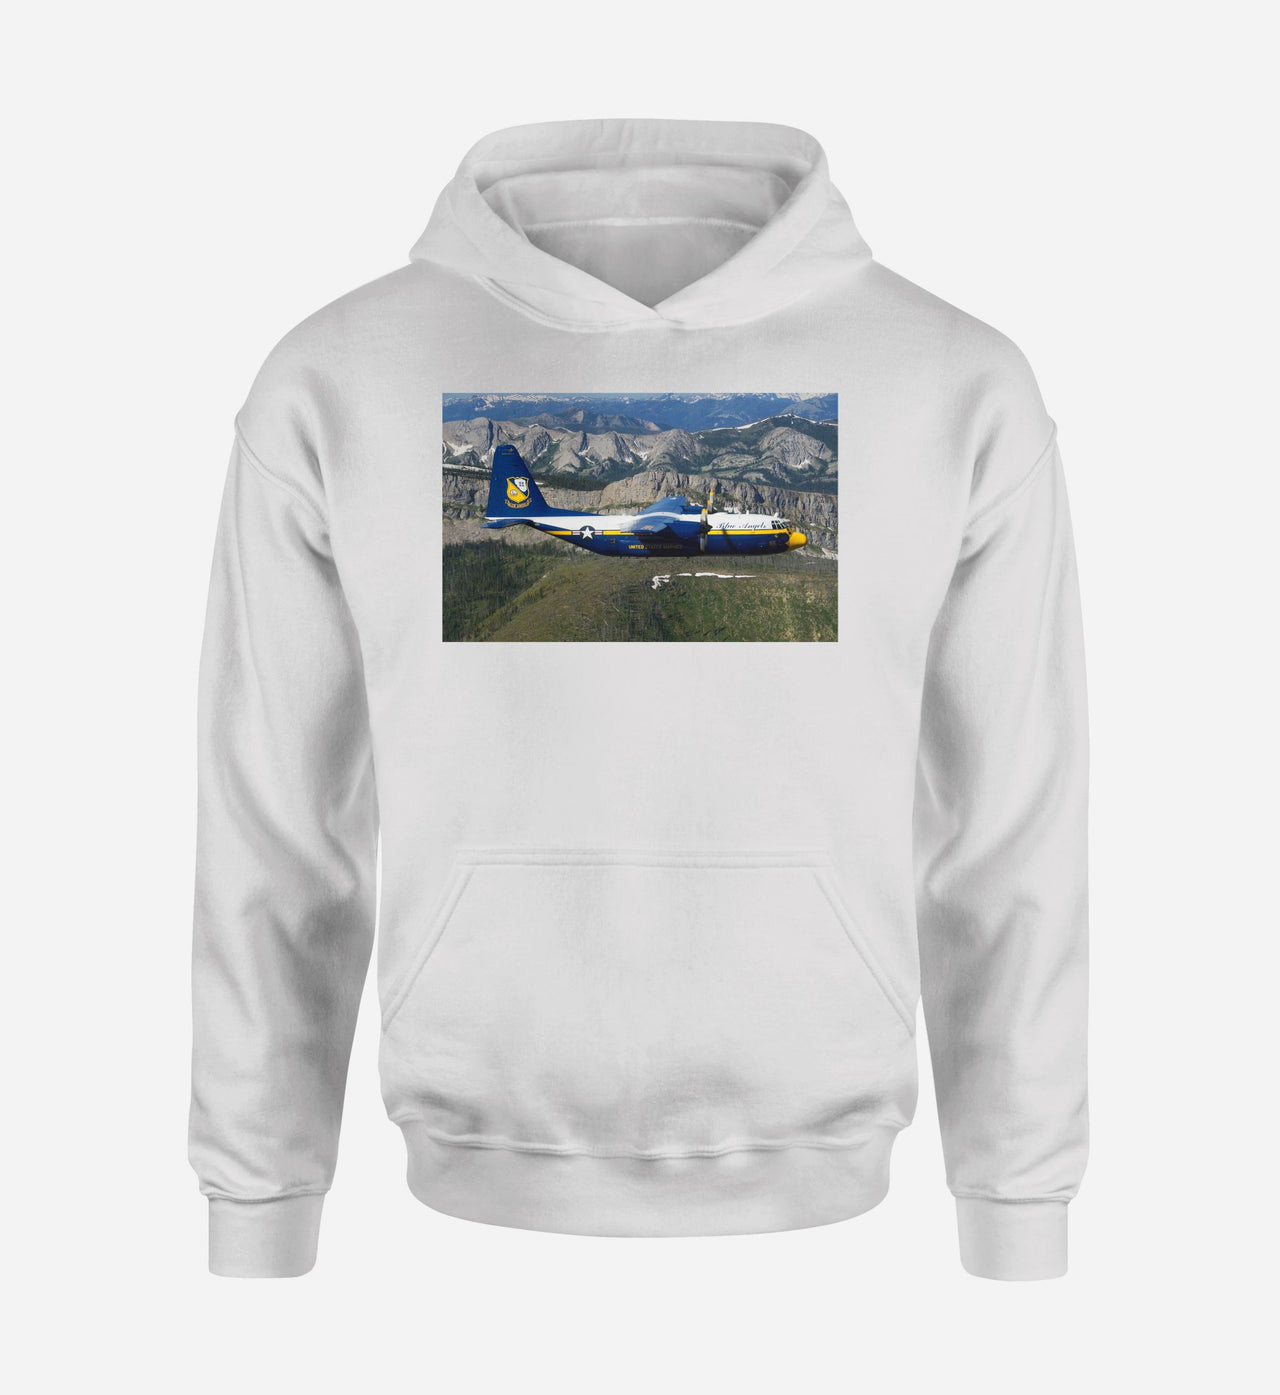 Amazing View with Blue Angels Aircraft Designed Hoodies